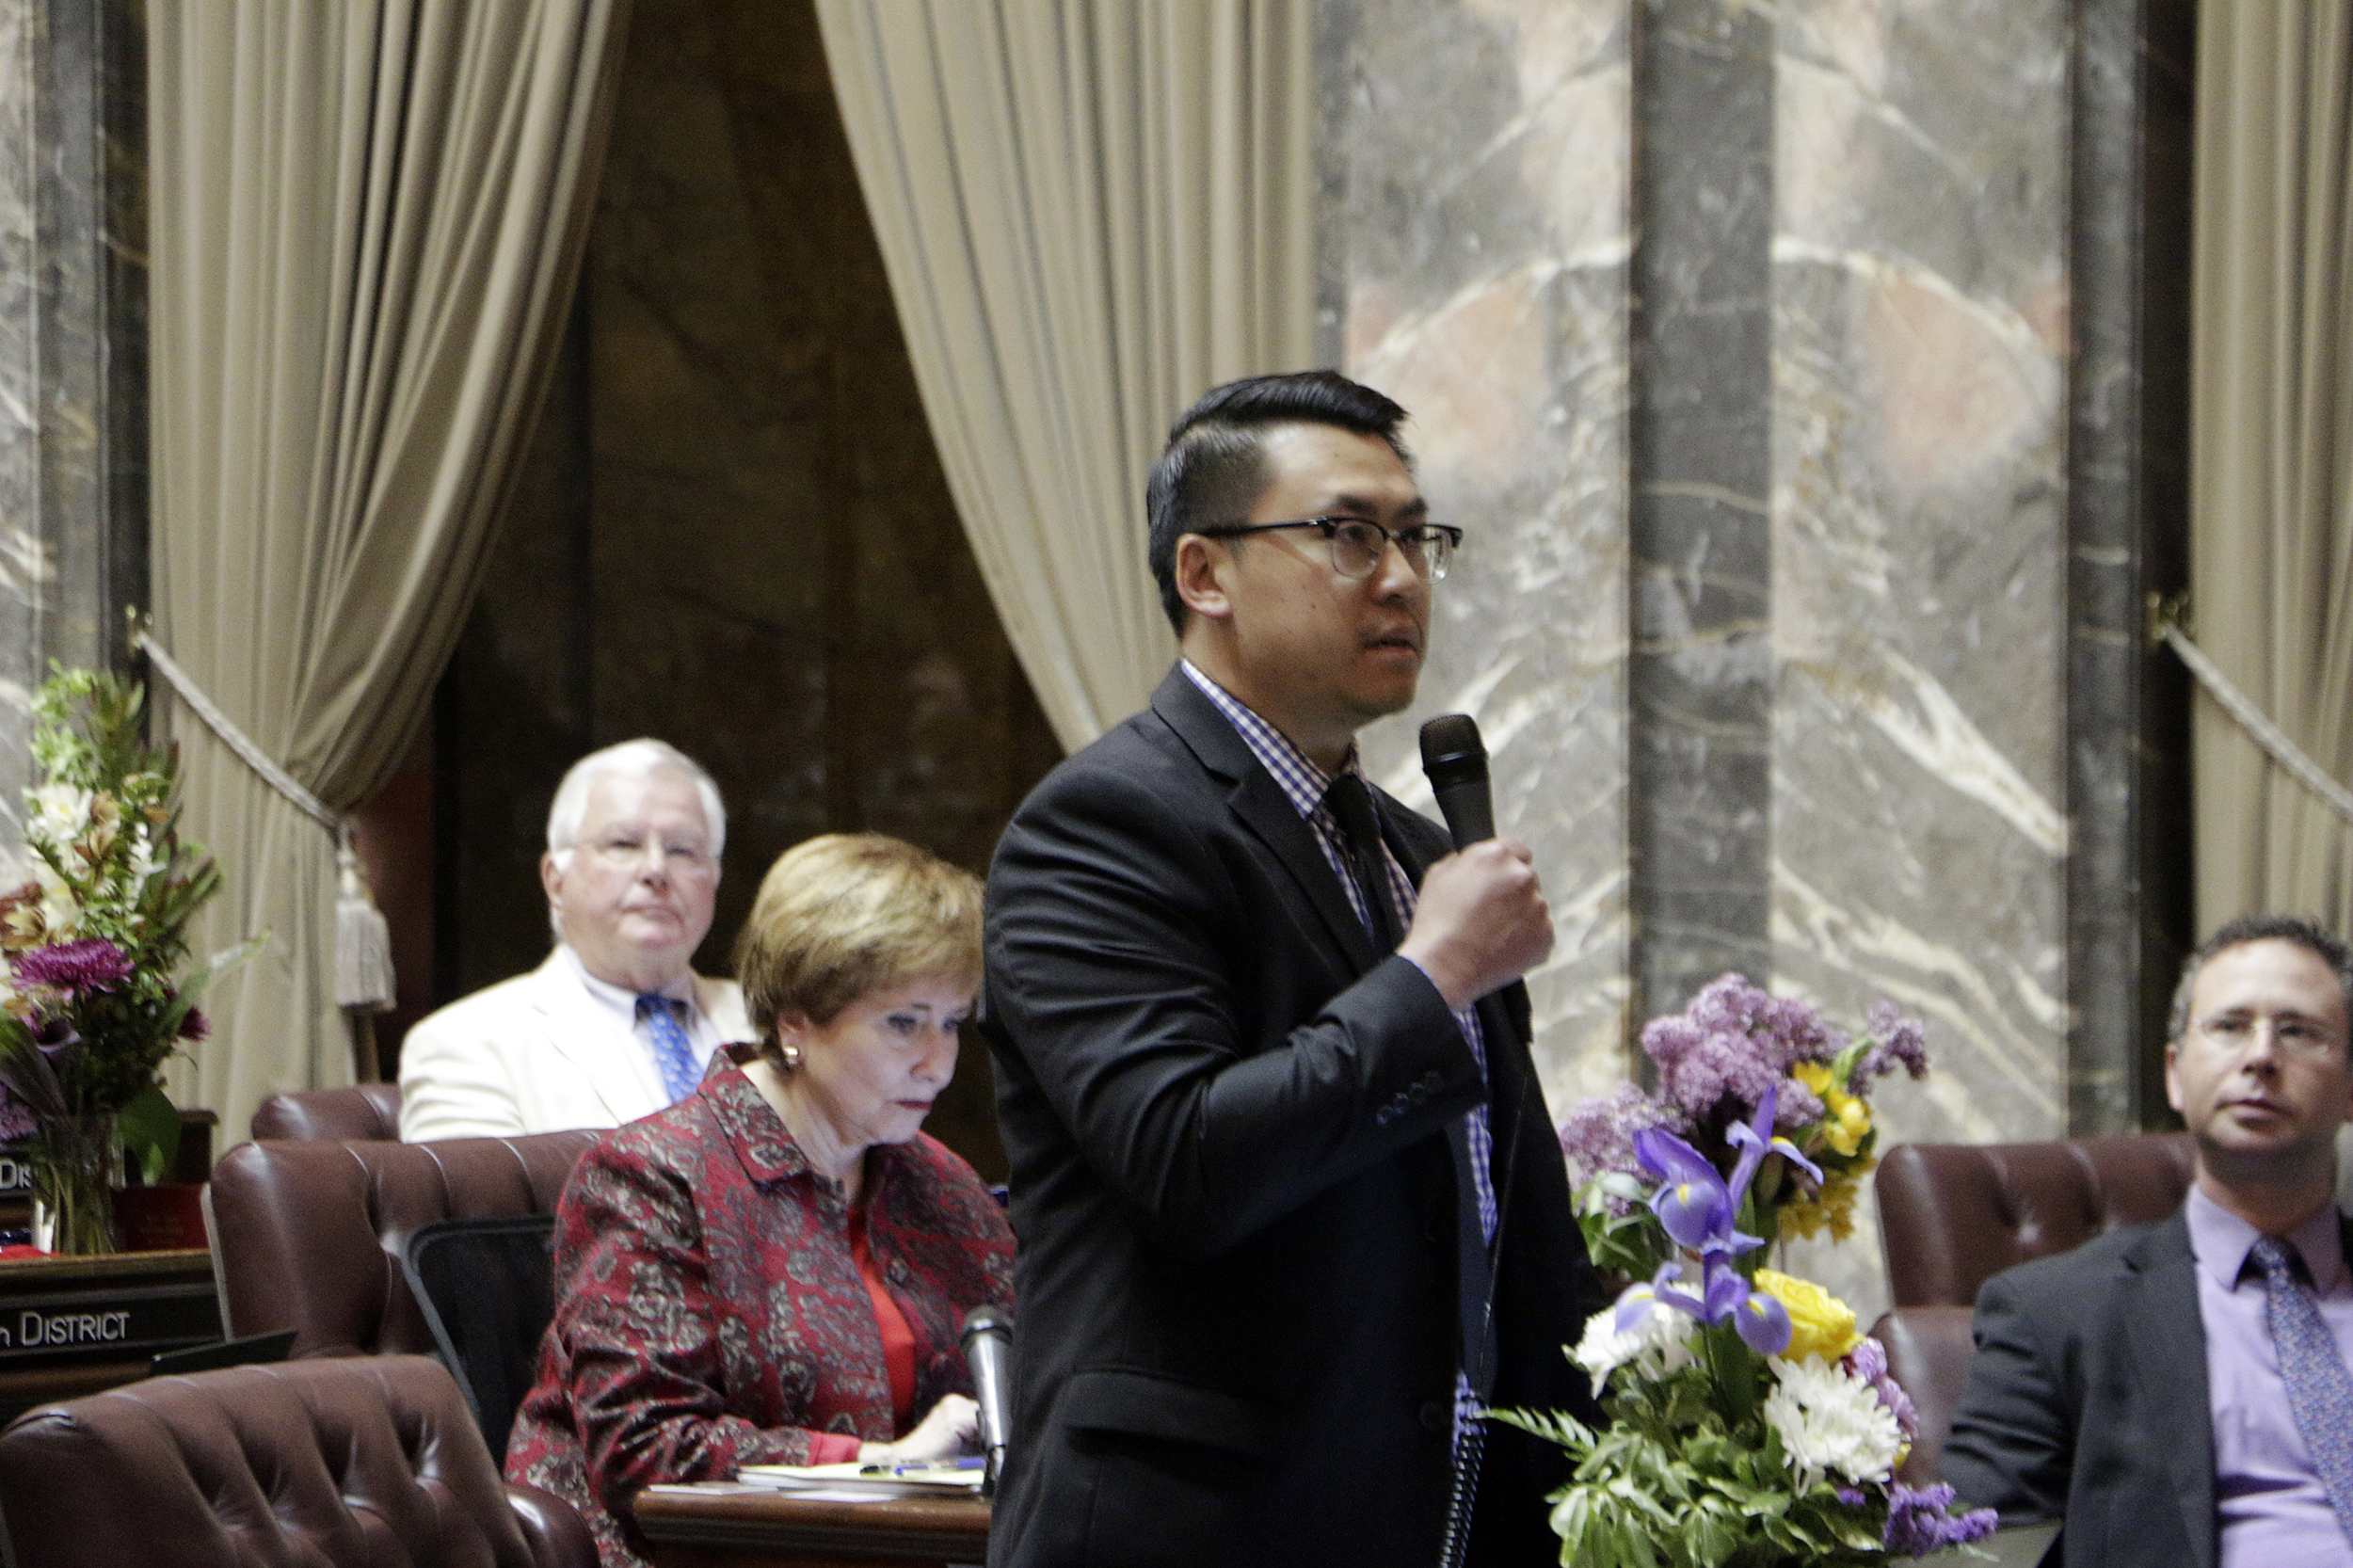 Democratic Sen. Joe Nguyen speaks in support of an initiative to the Legislature that would allow the state to use hiring and recruitment goals, but not quotas, to bring minority candidates into state jobs and education, on April 28, 2019, in Olympia. The measure loosens restrictions enacted in a 1998 initiative that banned government discrimination or preferential treatment based on factors such as race or gender. (Photo by Rachel La Corte/AP)